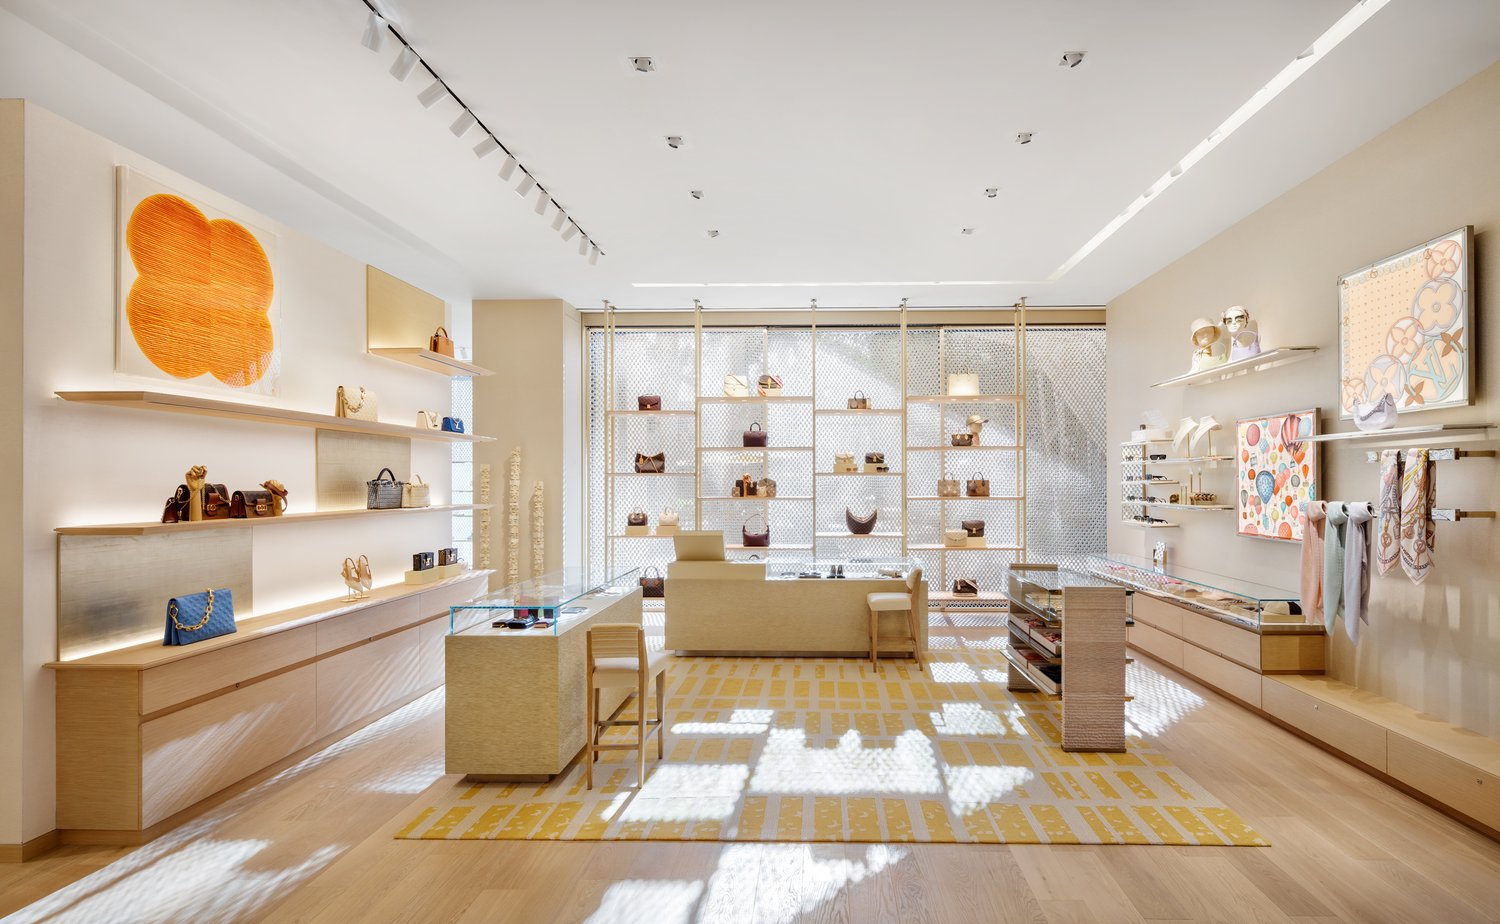 Louis Vuitton Set To Open New Coral Gables Location at The Shops at Merrick  Park — PROFILE Miami